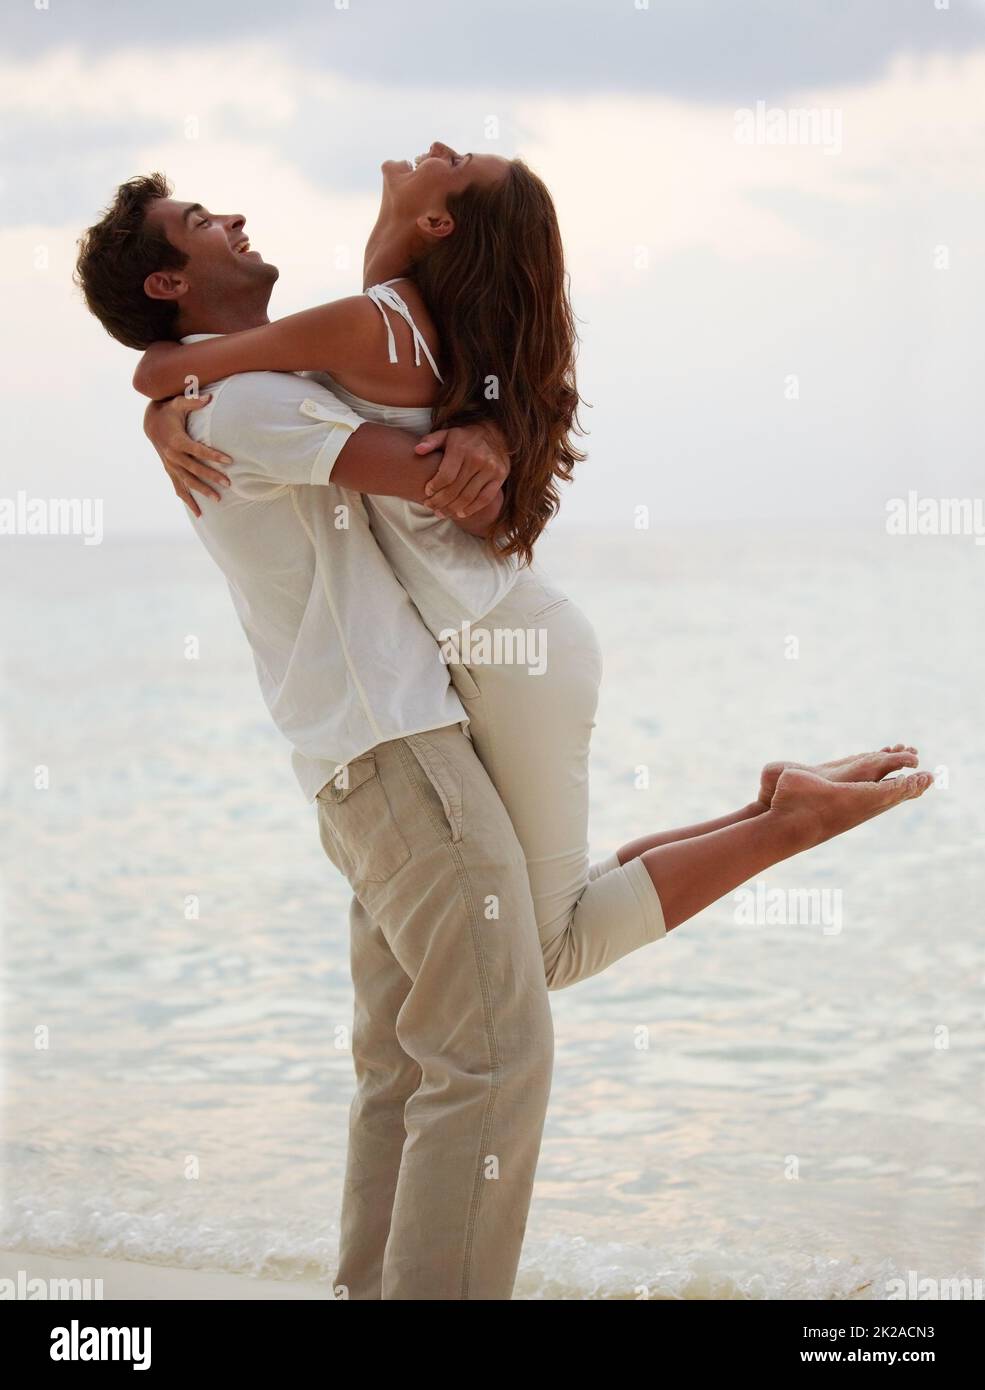 An evening embrace - Romance. Young man lifting his gorgeous girlfriend into the air while on the beach. Stock Photo